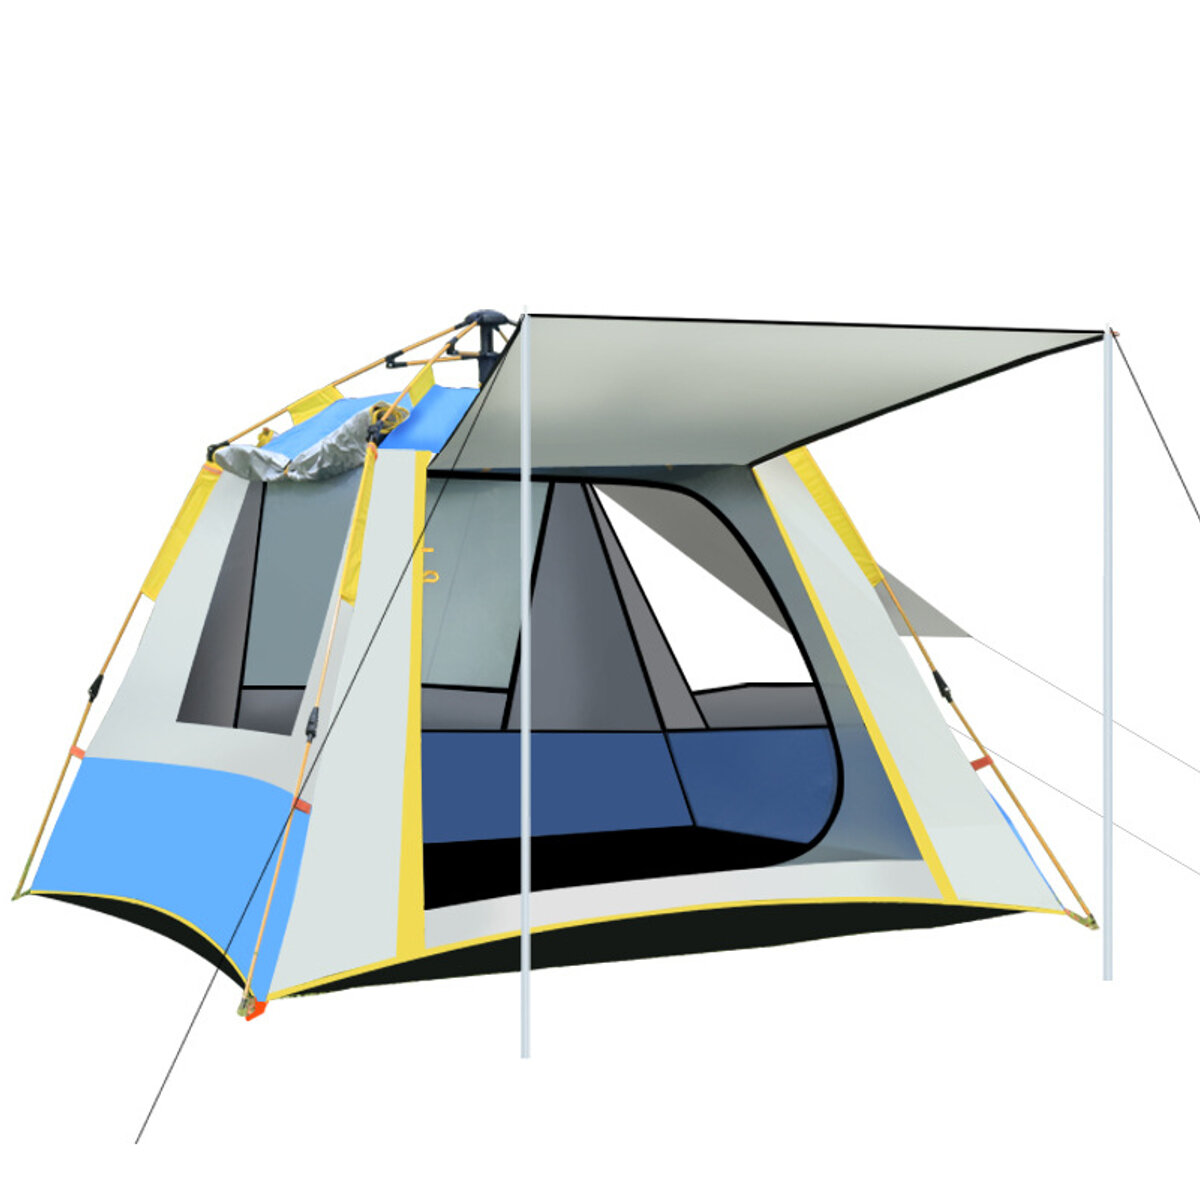 5-6 People Fully Automatic Set Up Tent With 3 Windows Family Picnic Travel Rainproof Windproof Camping Tent Carpa